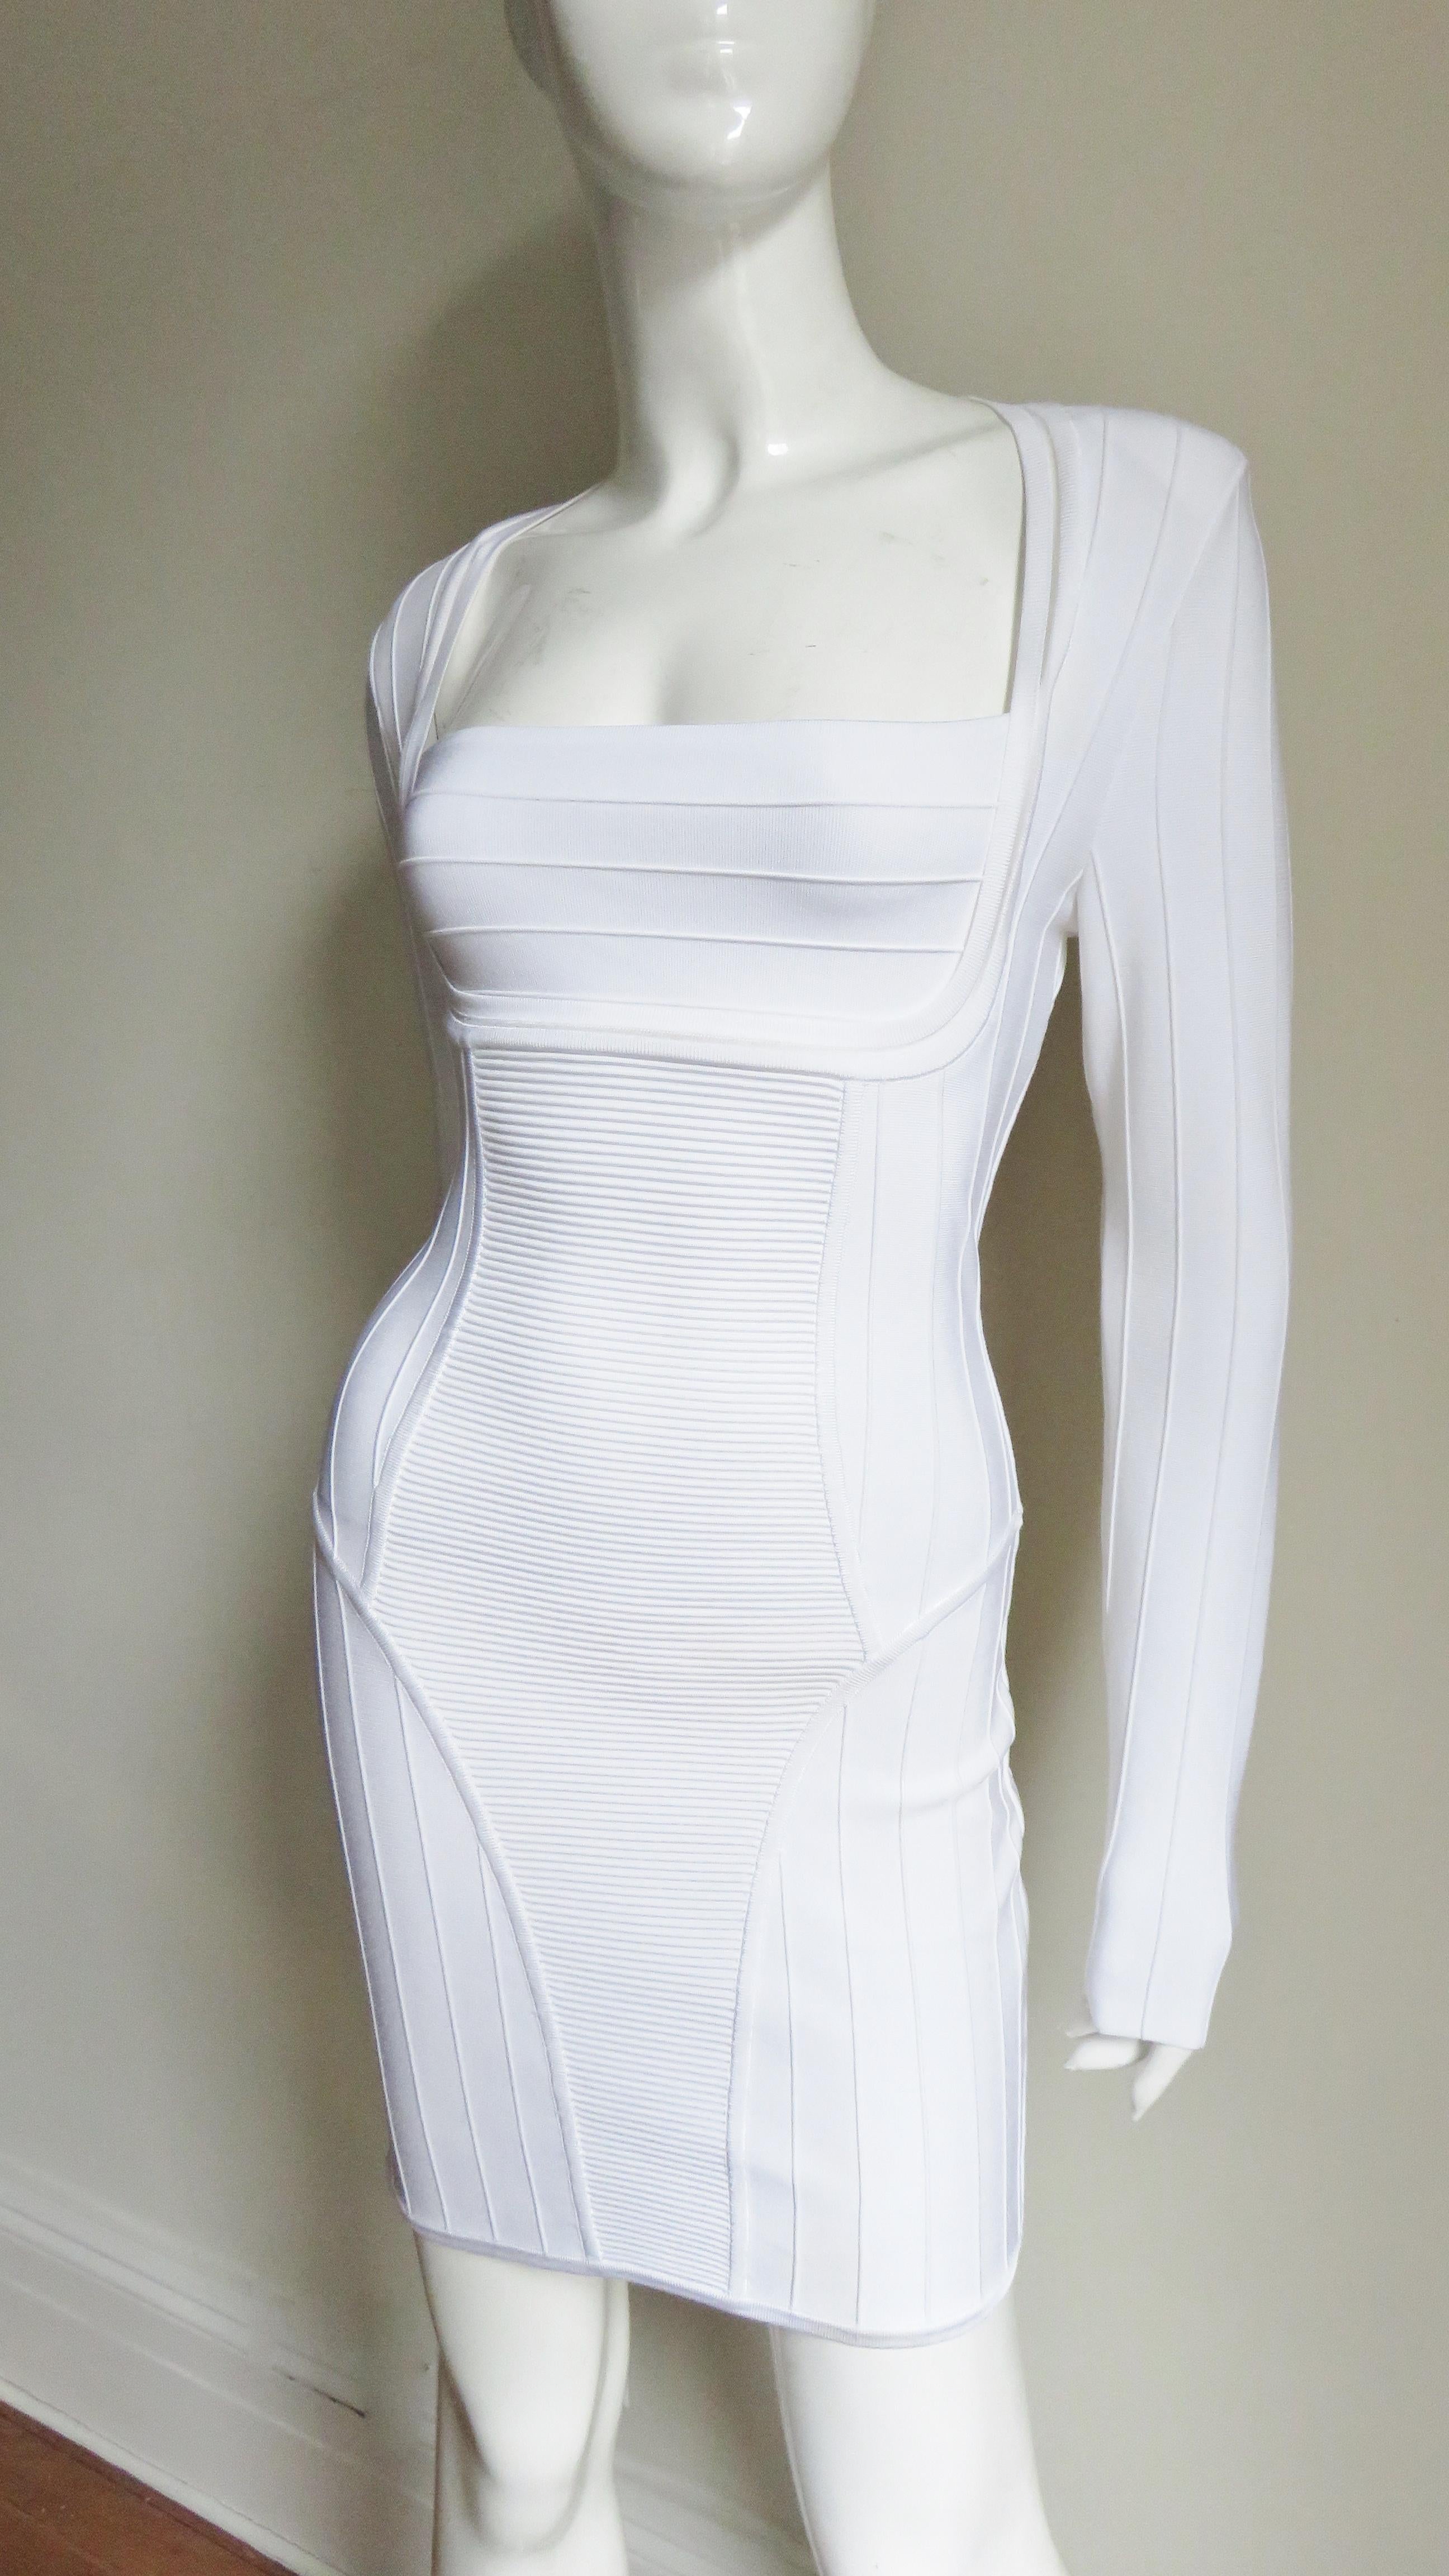 A fabulous white body conscious bandage dress from Pierre Balmain.   It has long sleeves, a square cut neckline, and fabulous ribbed panels accentuating the waist and bust. It is unlined with a gold Balmain inscribed back zipper and small pads at